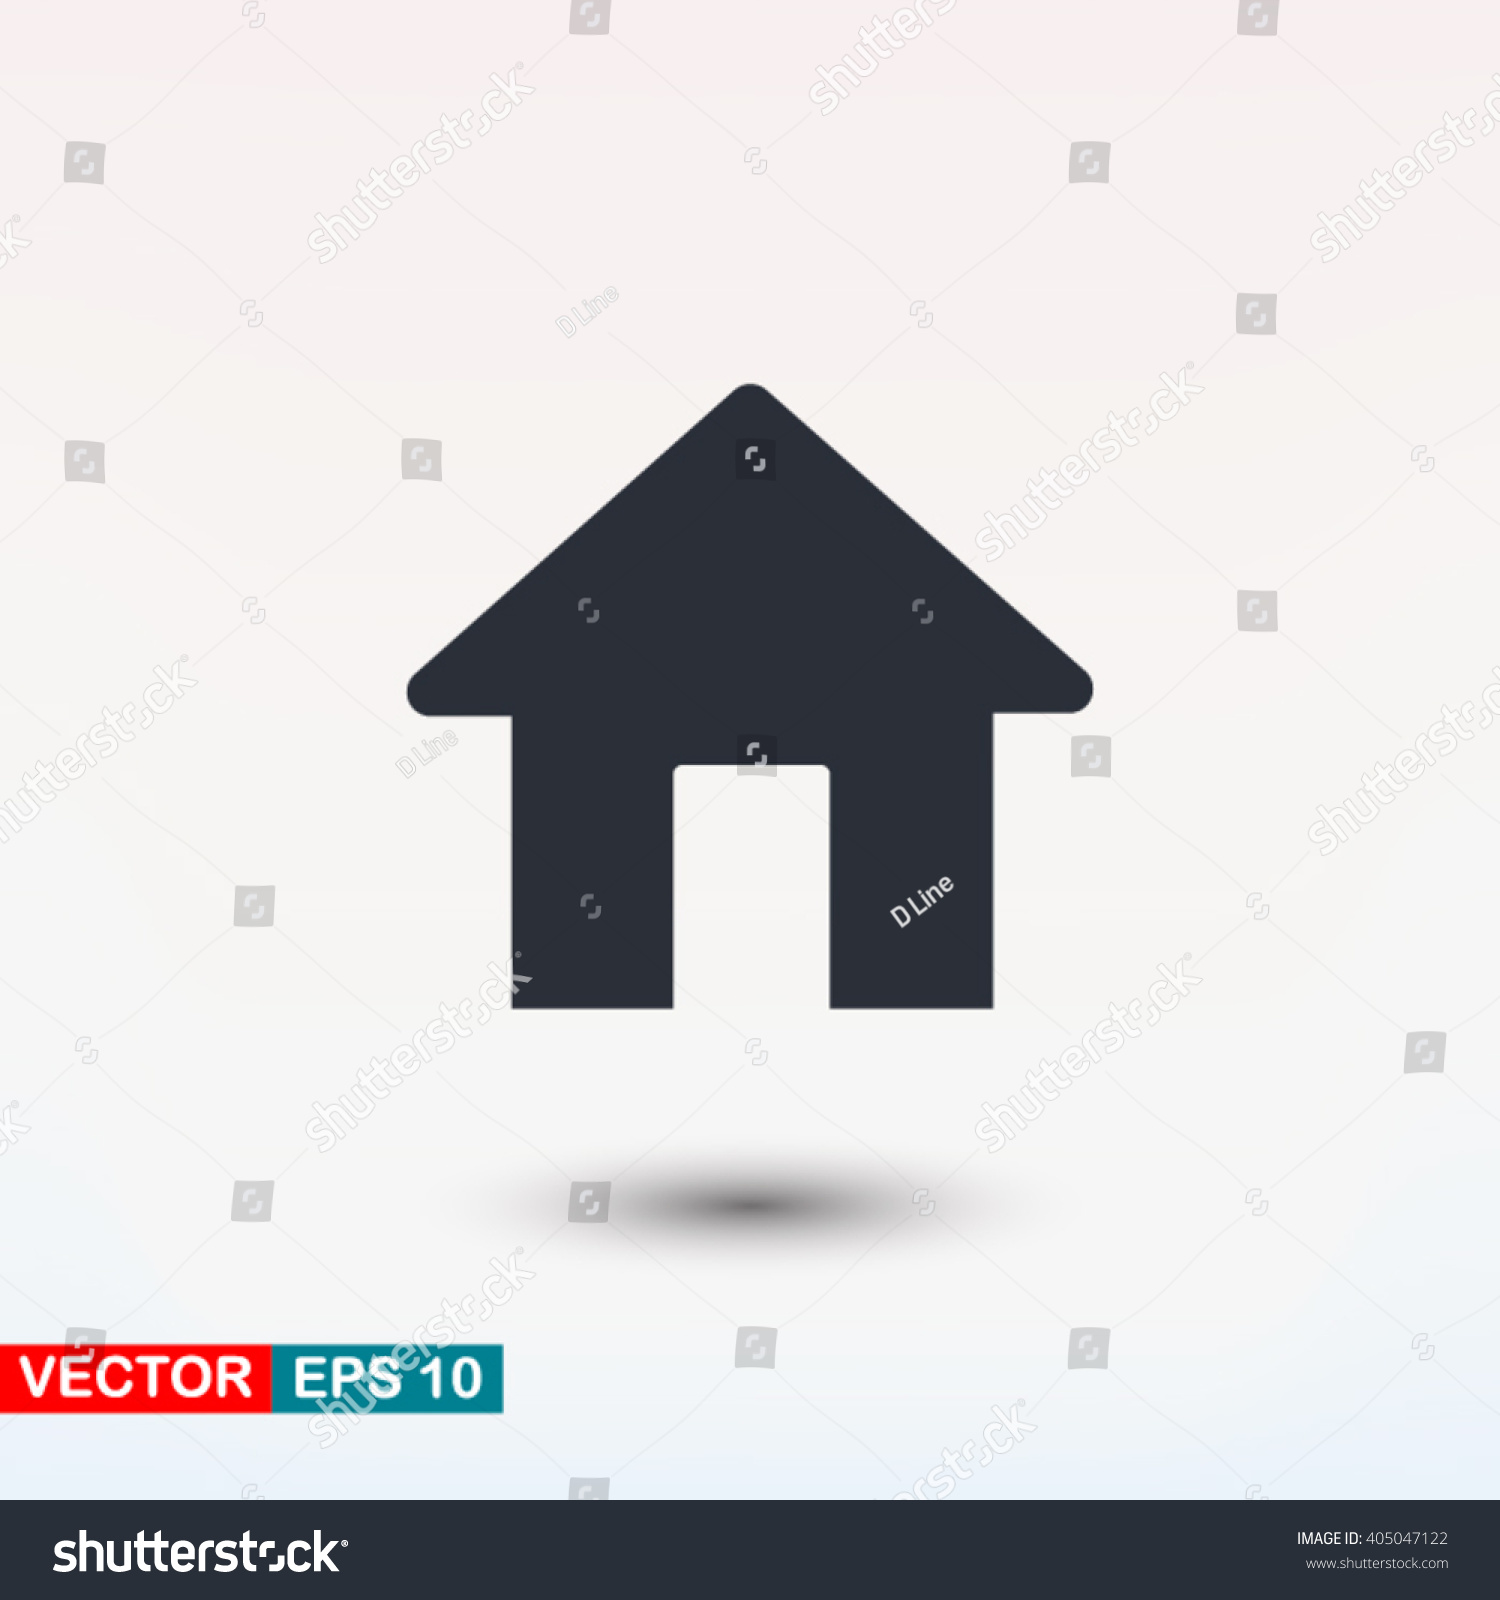 SVG of House vector icon svg